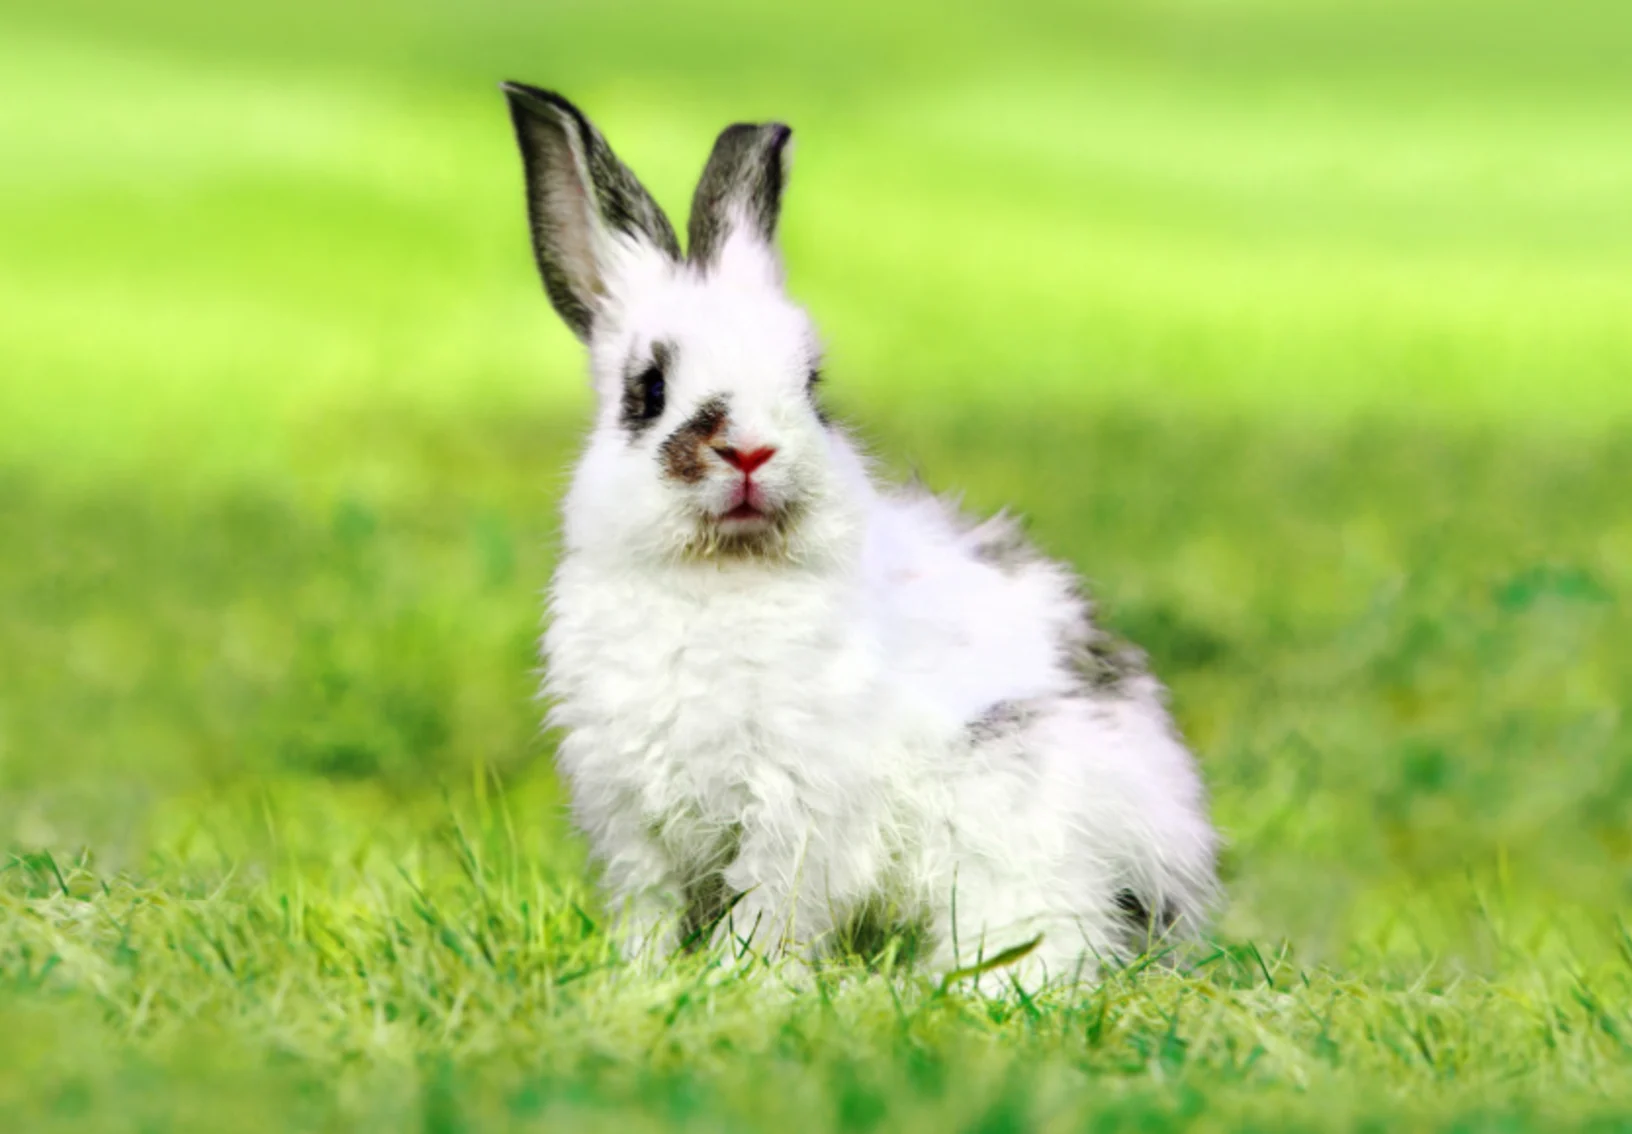 Small White Bunny Sitting in Grass